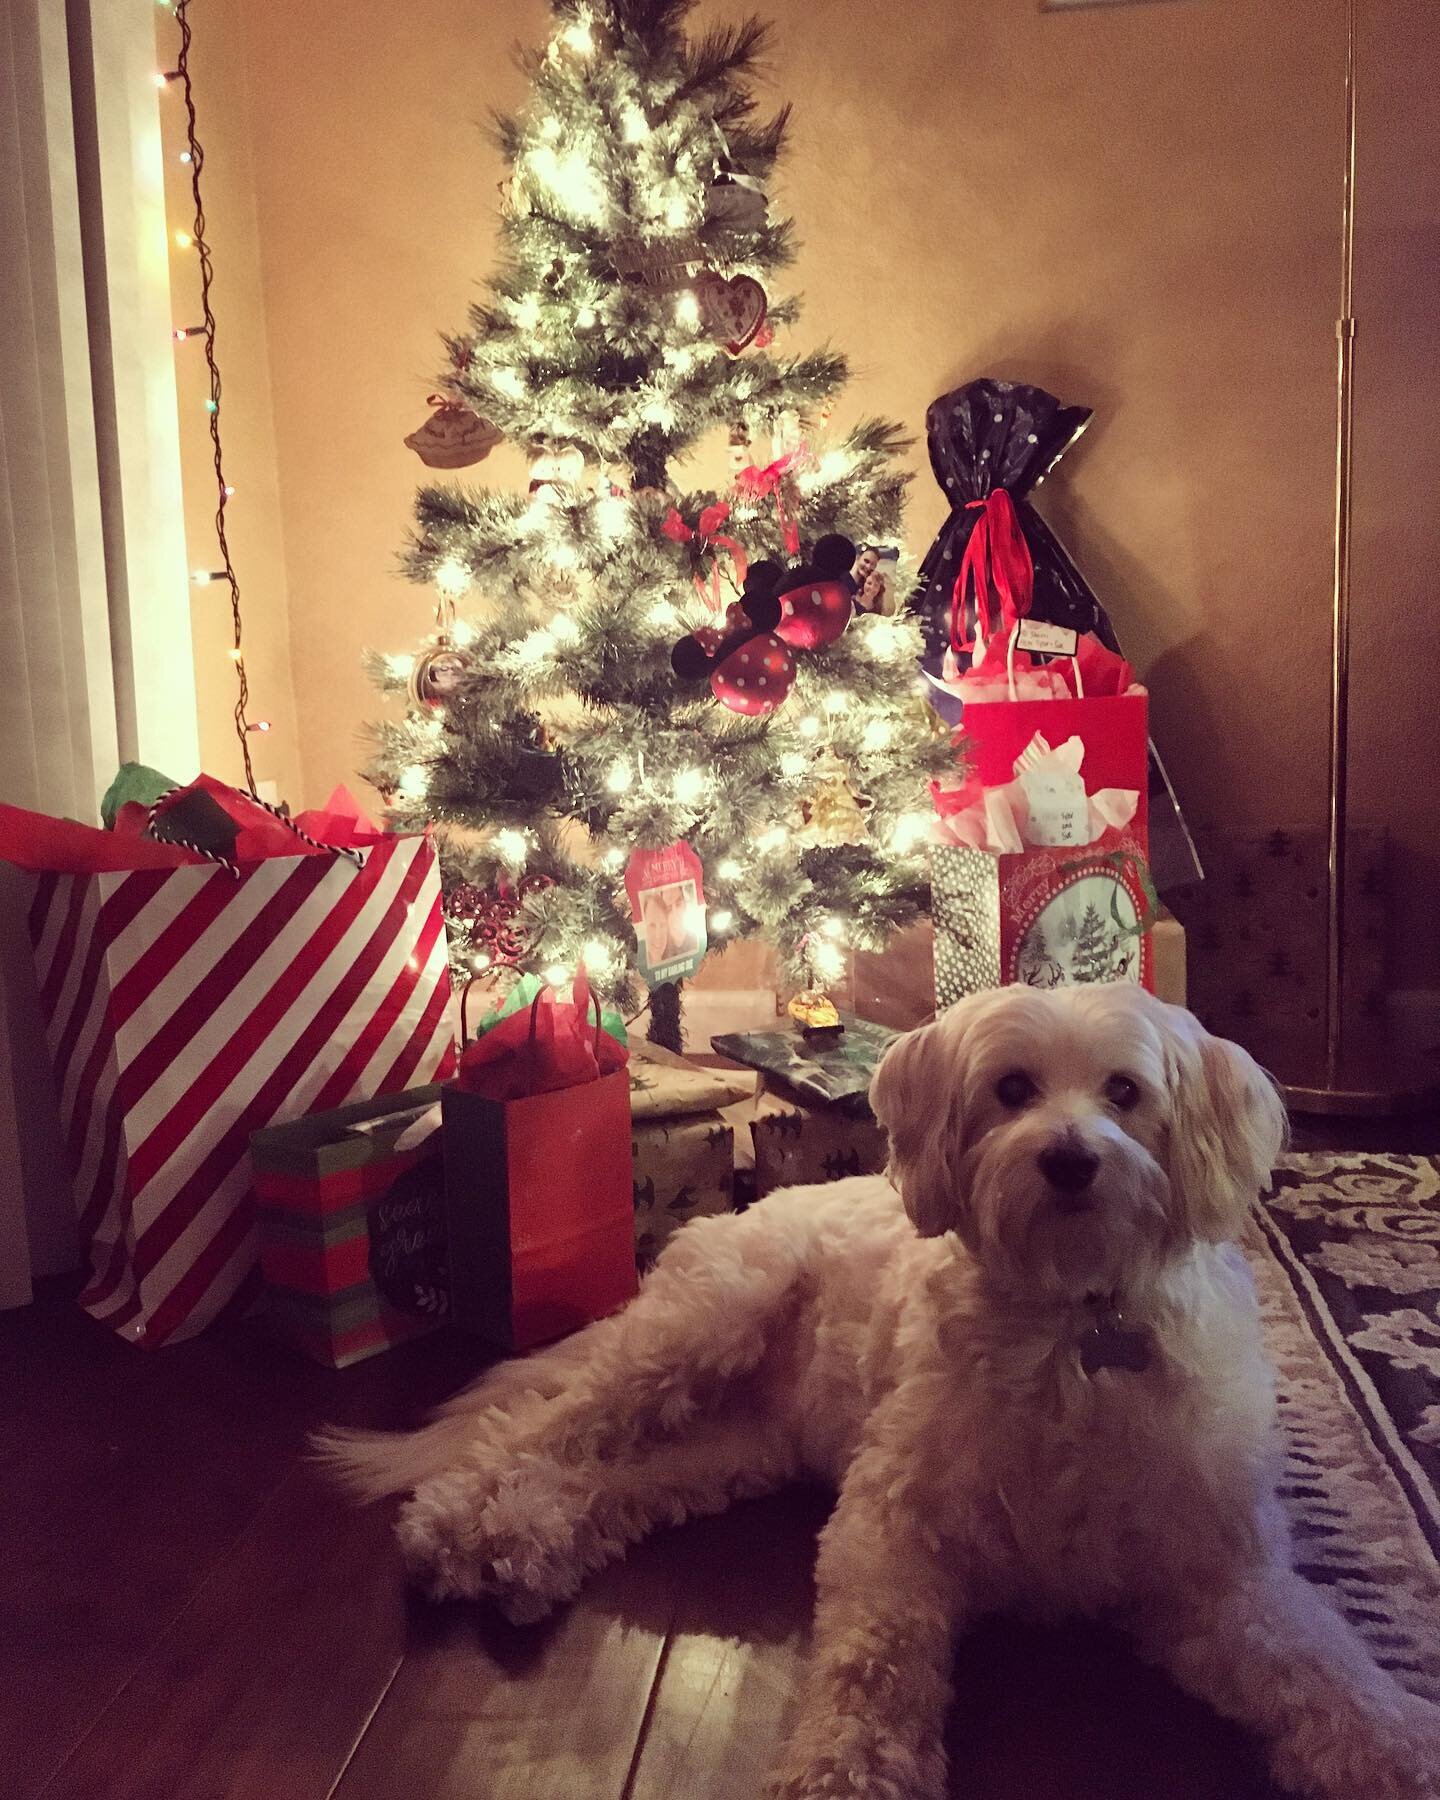 Chewie thinks it&rsquo;s beginning to look a lot like Christmas! #chewiethedog #christmastimeishere